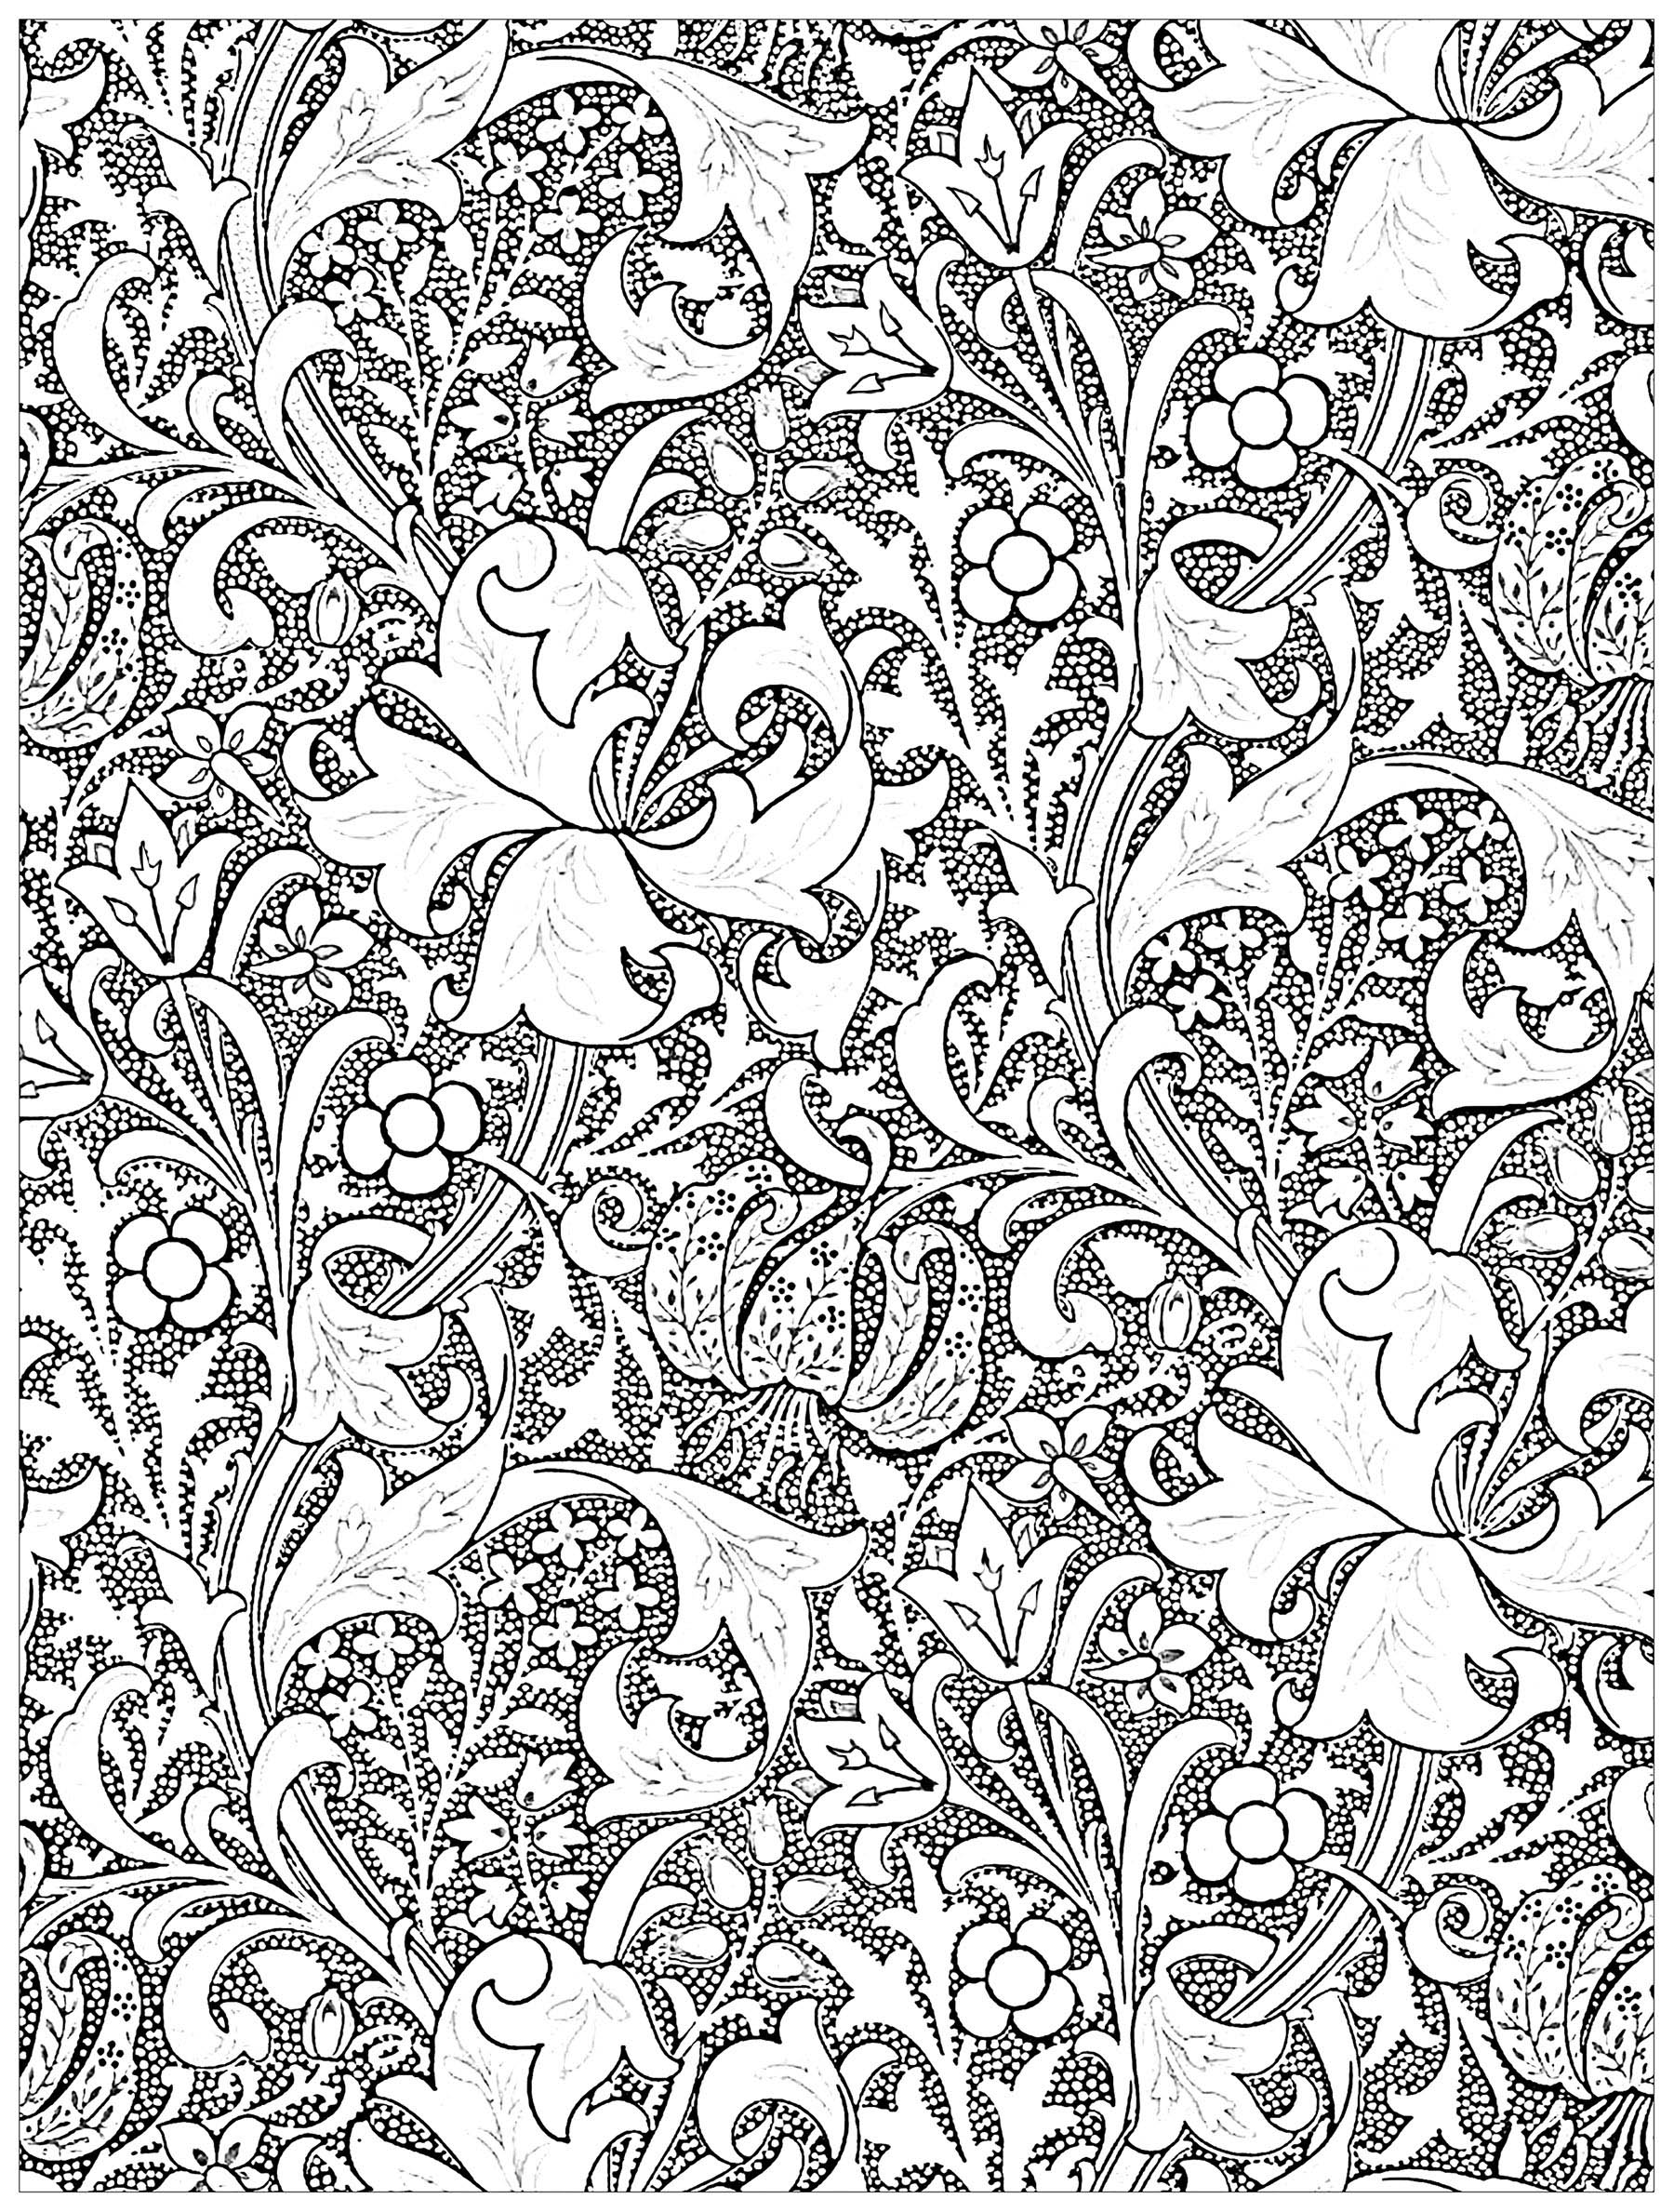 Exclusive coloring page created from textile design 'Golden Lily' by John Henry Dearle (1889). Color these entwining lily stems and tendrils ...